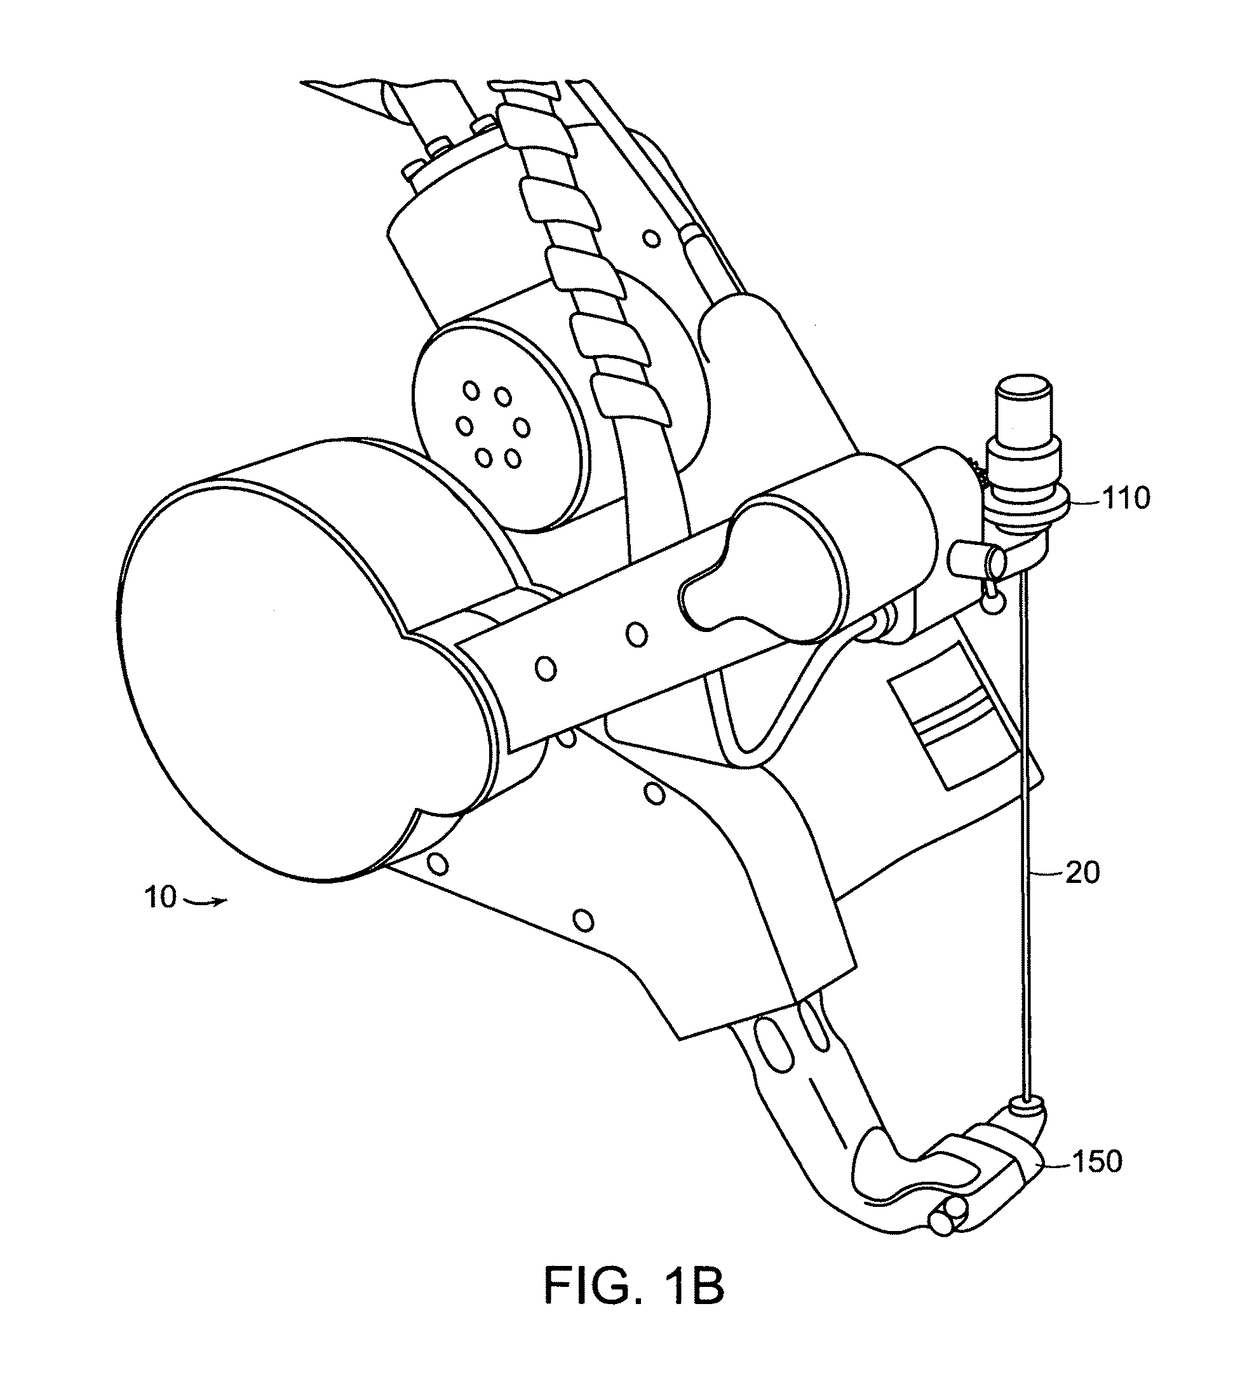 Rotating needle driver and apparatuses and methods related thereto